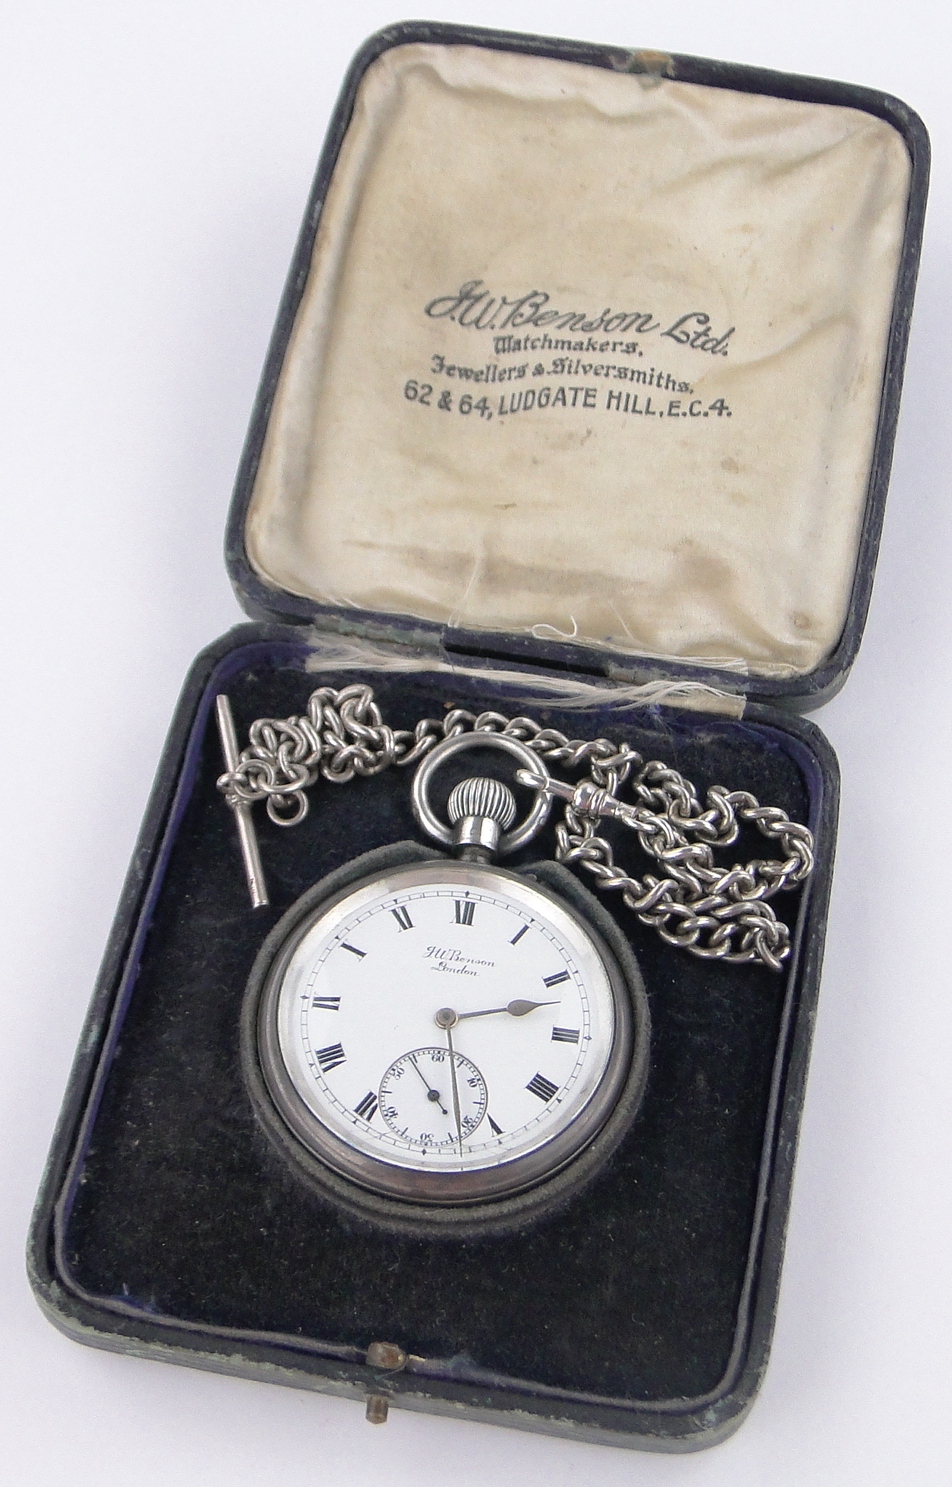 An Edwardian silver cased topwind pocket watch "The Bank" by J W Benson of London, - Image 6 of 6